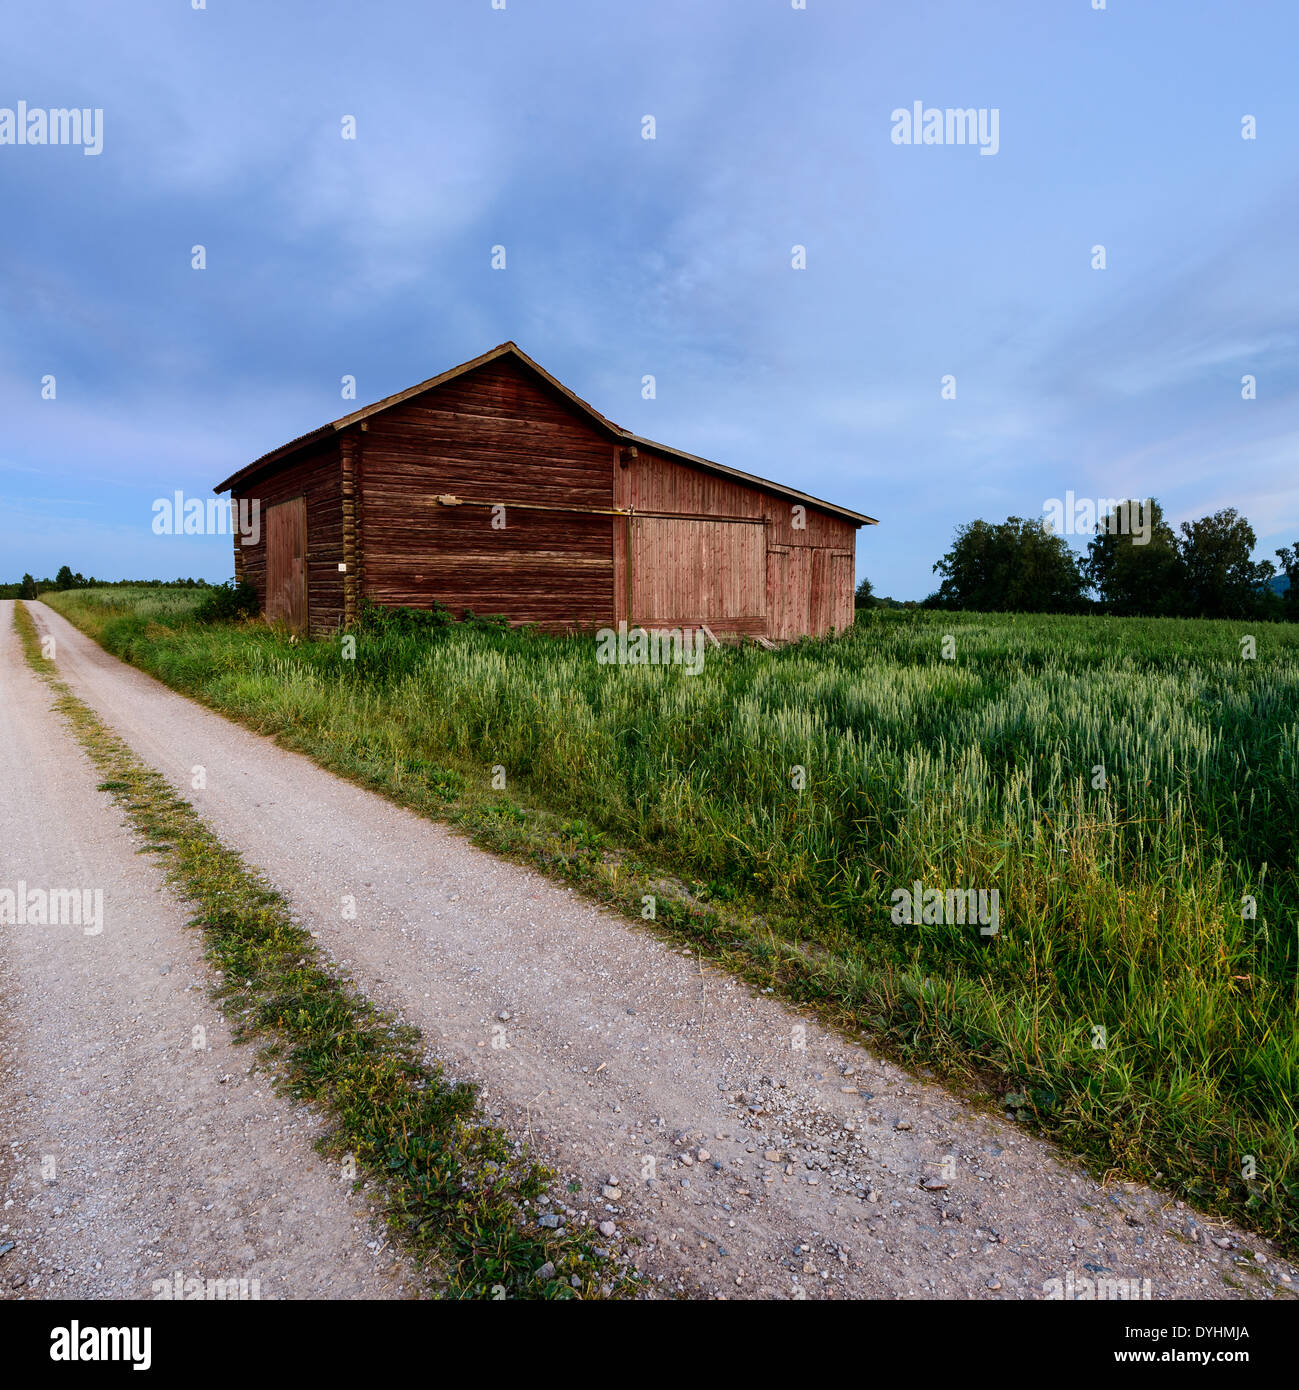 Country lane and farm building, Dalarna, Sweden. Stock Photo